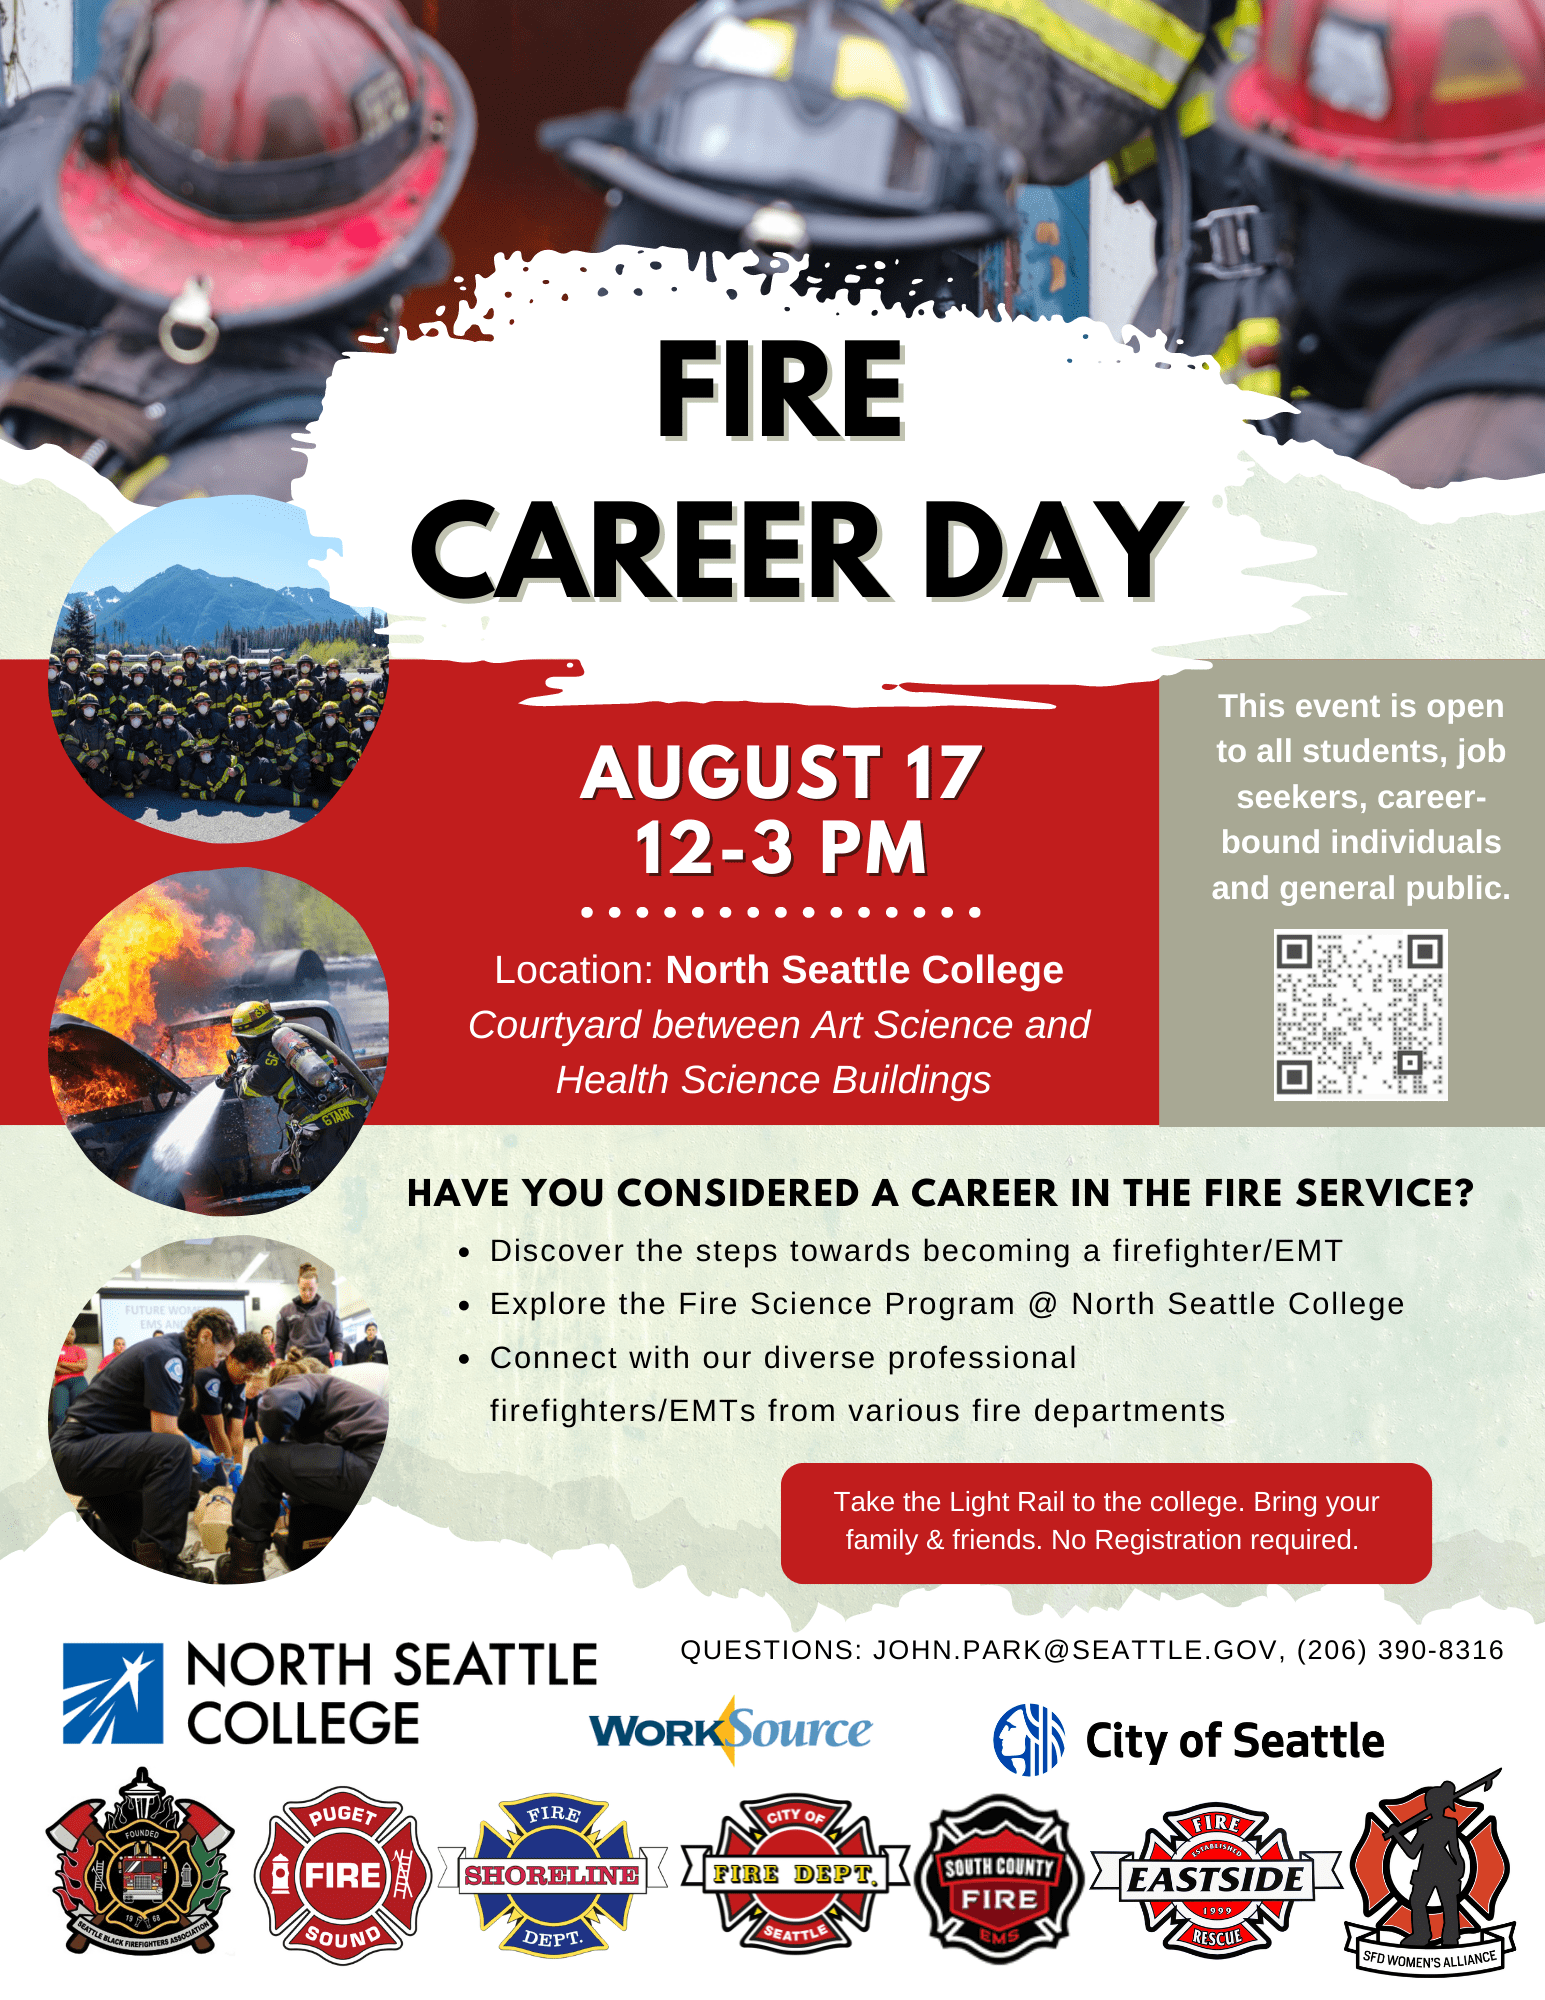 Flyer promotes an upcoming Fire Service Career Day from noon to 3 p.m. on August 17 at North Seattle College. The exact location is the courtyard between the Art Science and Health Science buildings. There is a QR code for people who wish to use their mobile device cameras for more information. At the bottom are the logos of the 10 sponsoring departments.